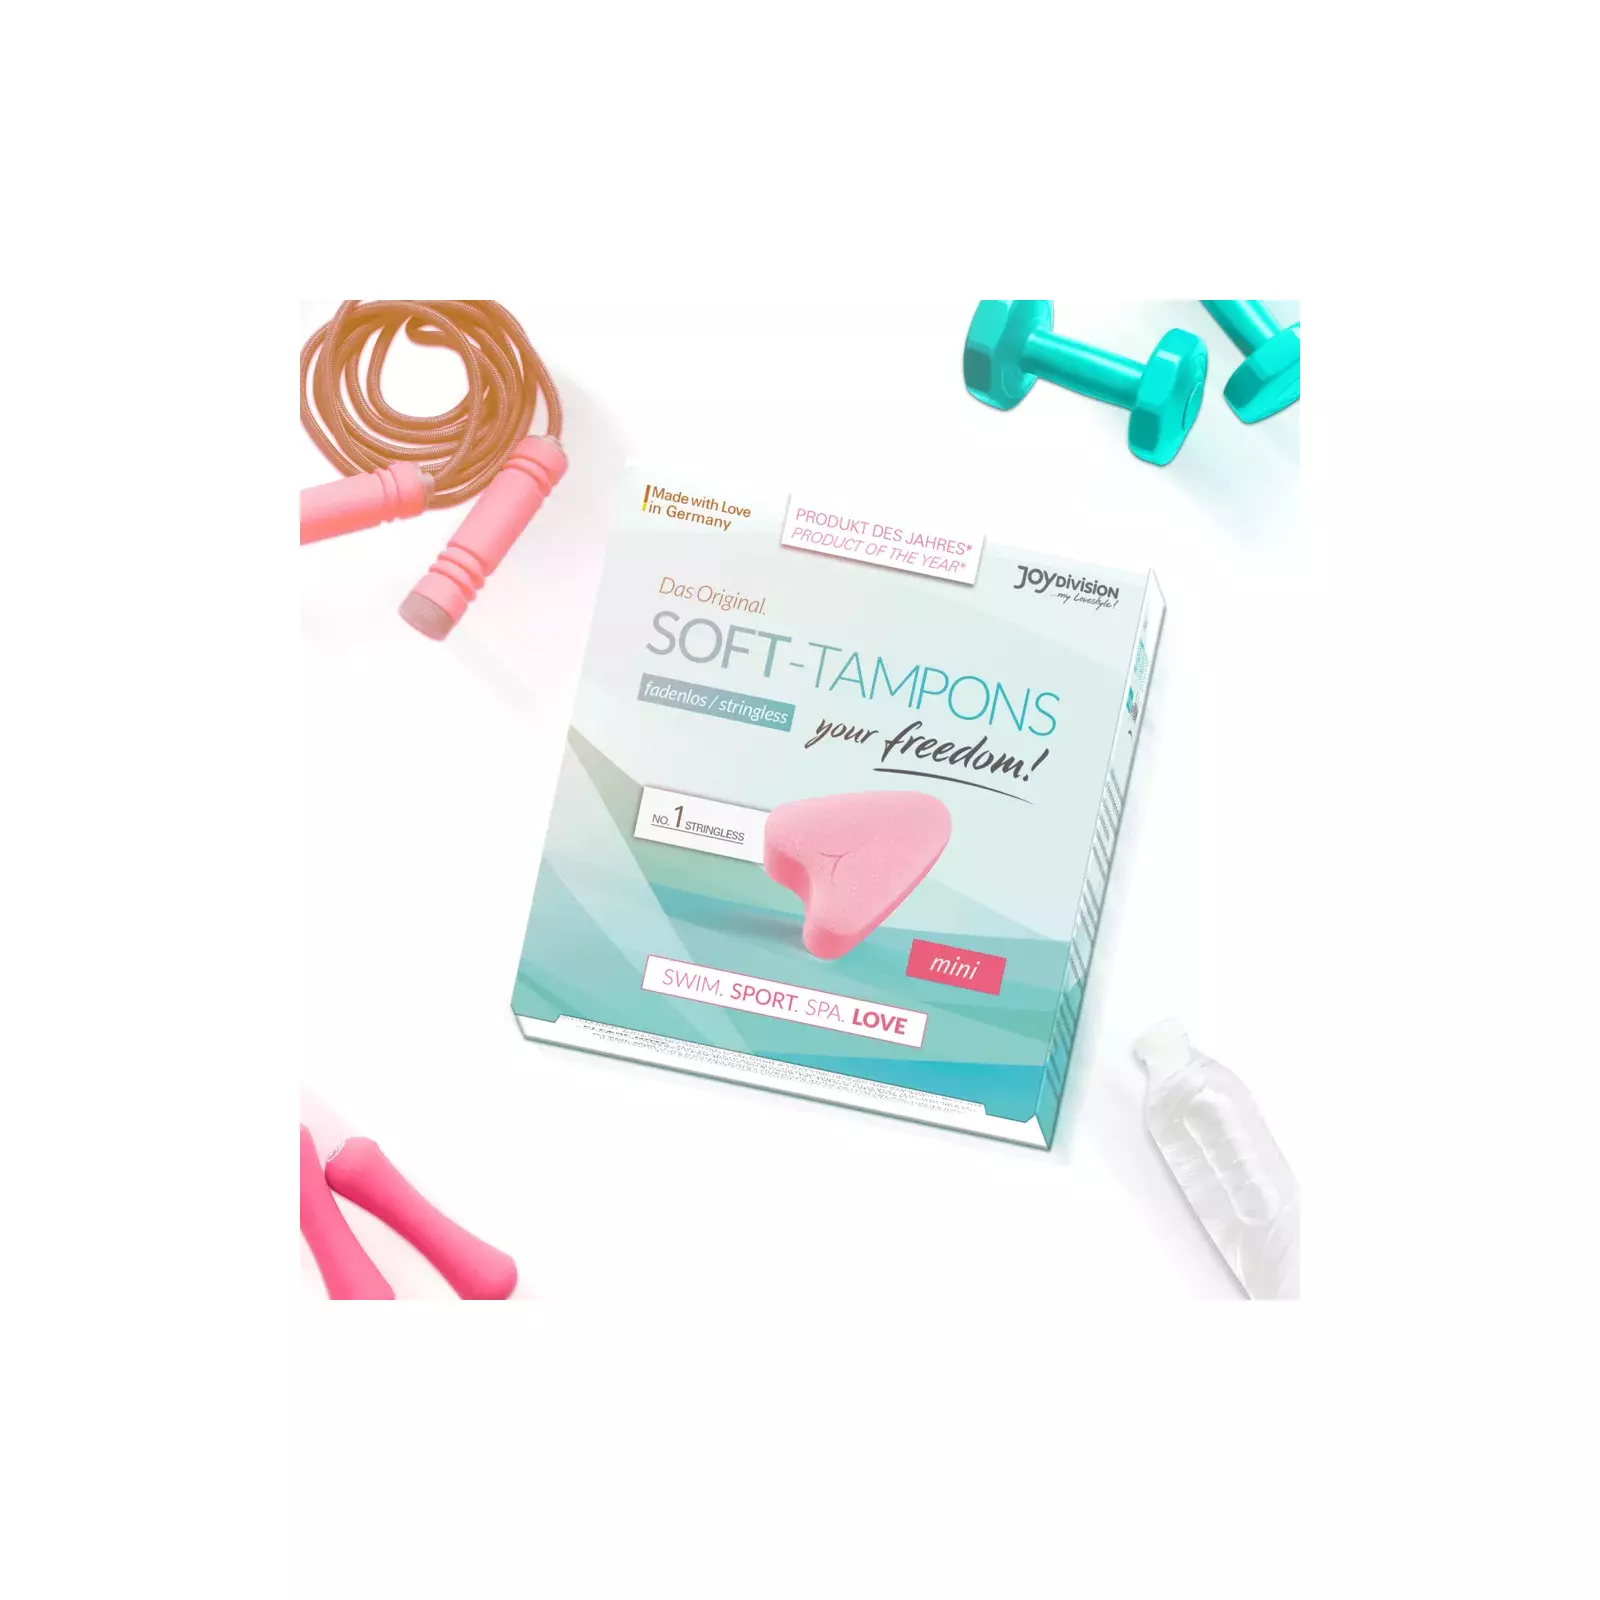 SOFT-TAMPONS D-207286 Photo 1